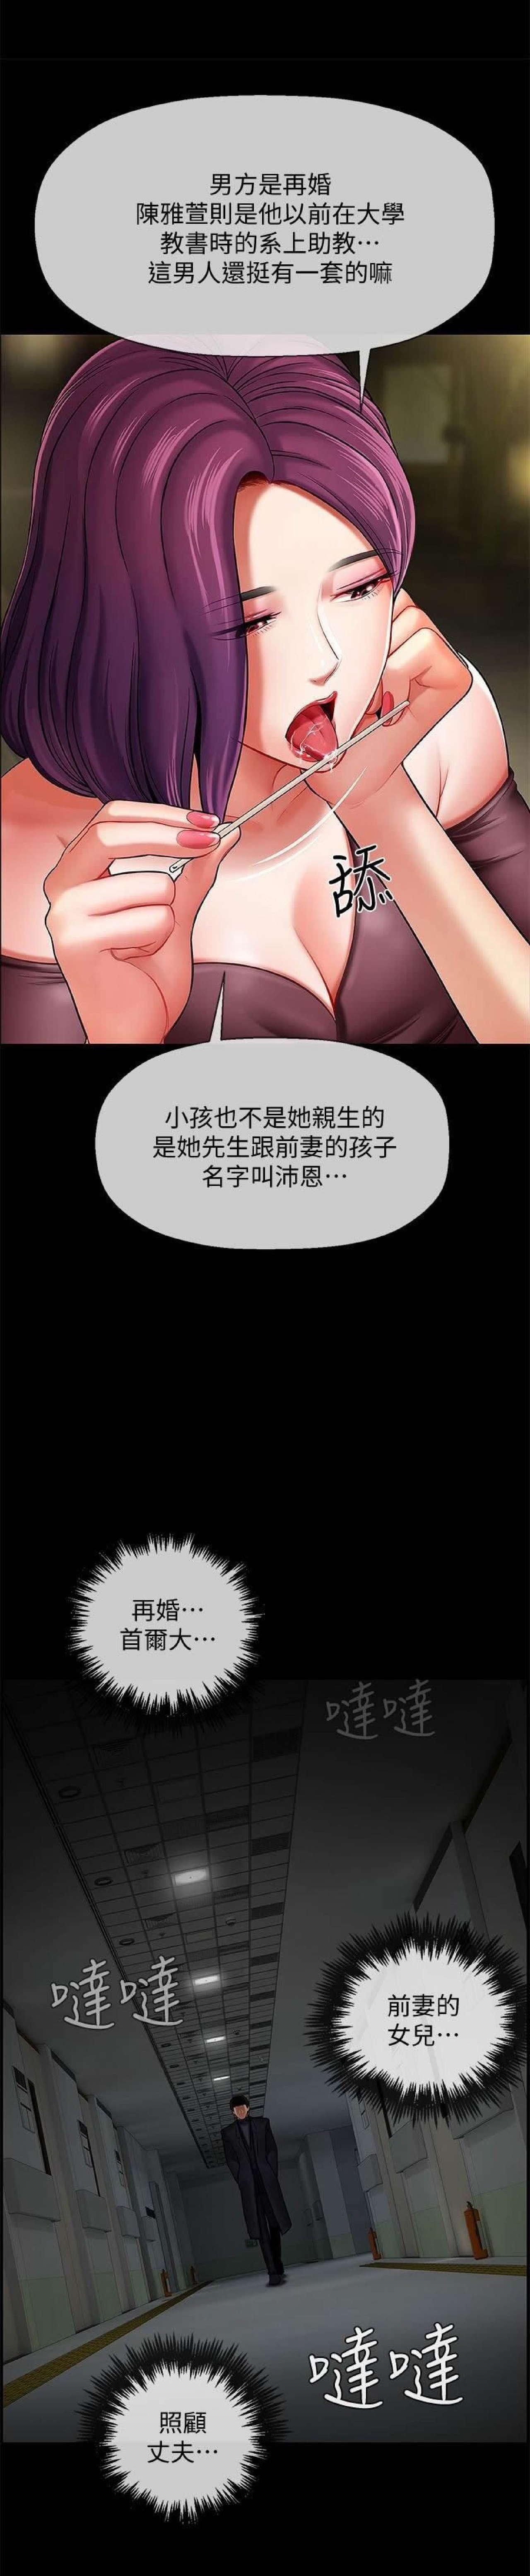 Oldyoung 坏老师 | PHYSICAL CLASSROOM 3 Cream Pie - Page 2